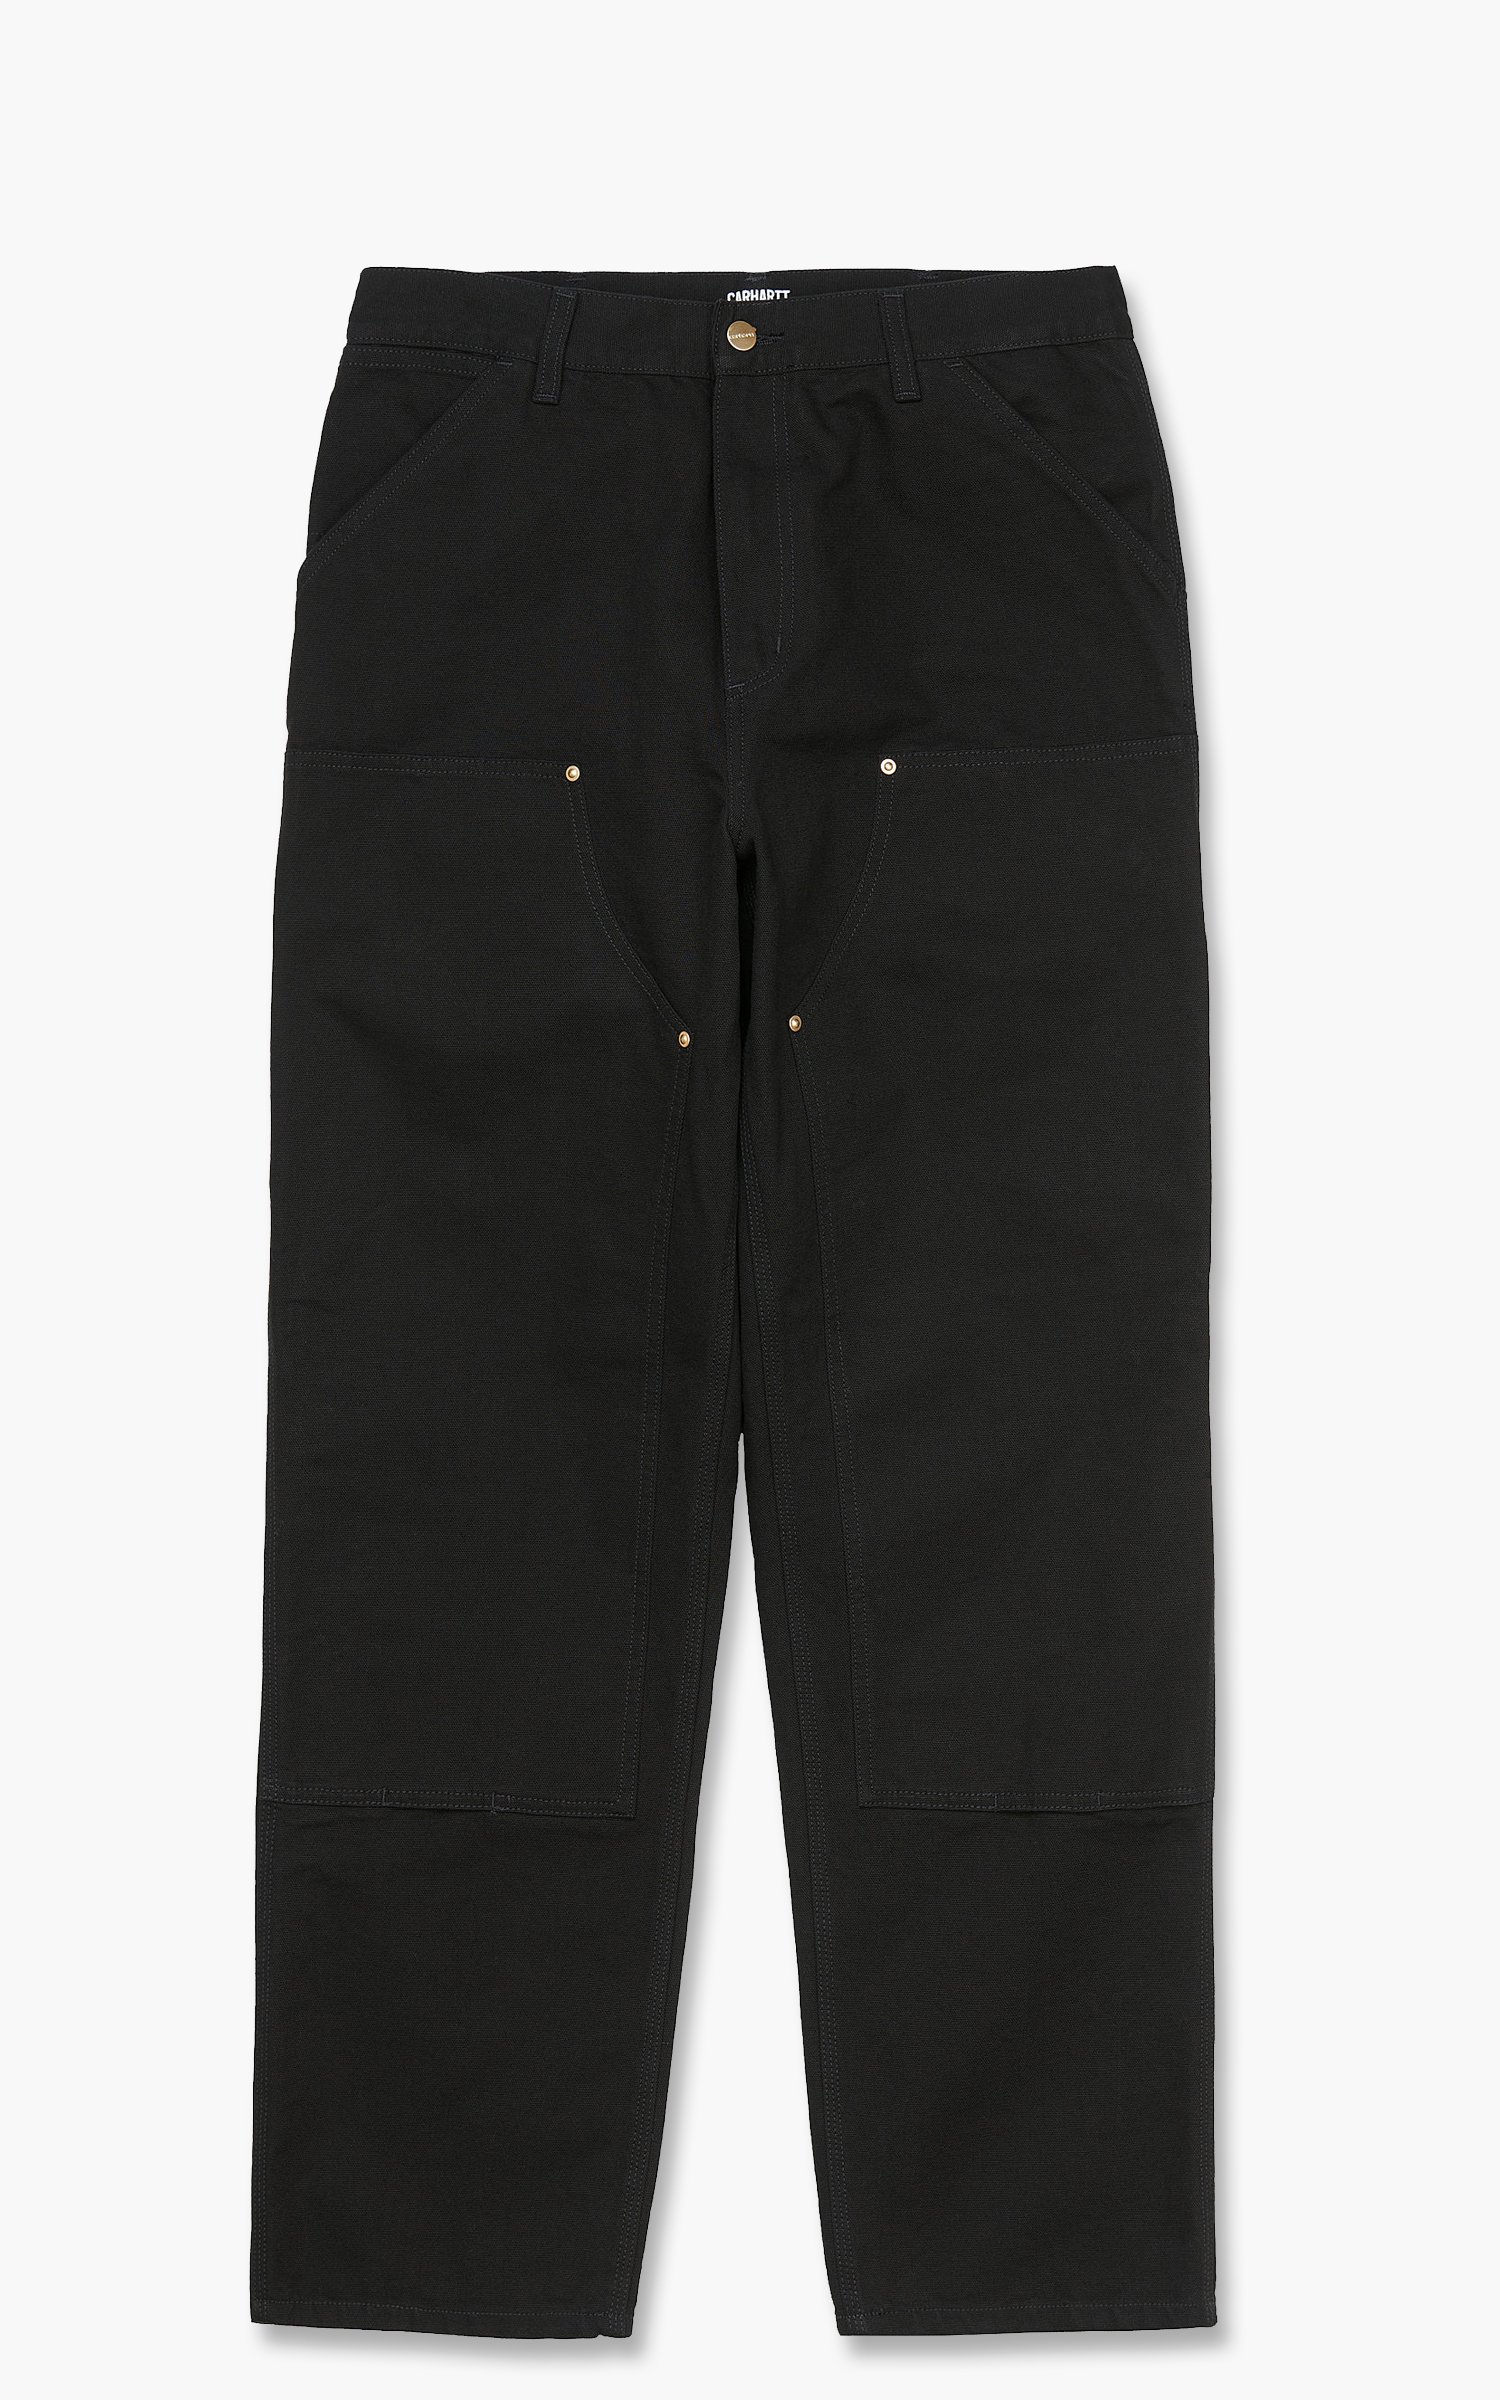 Carhartt WIP Double Knee Pant Dearborn Canvas Rinsed Black | Cultizm